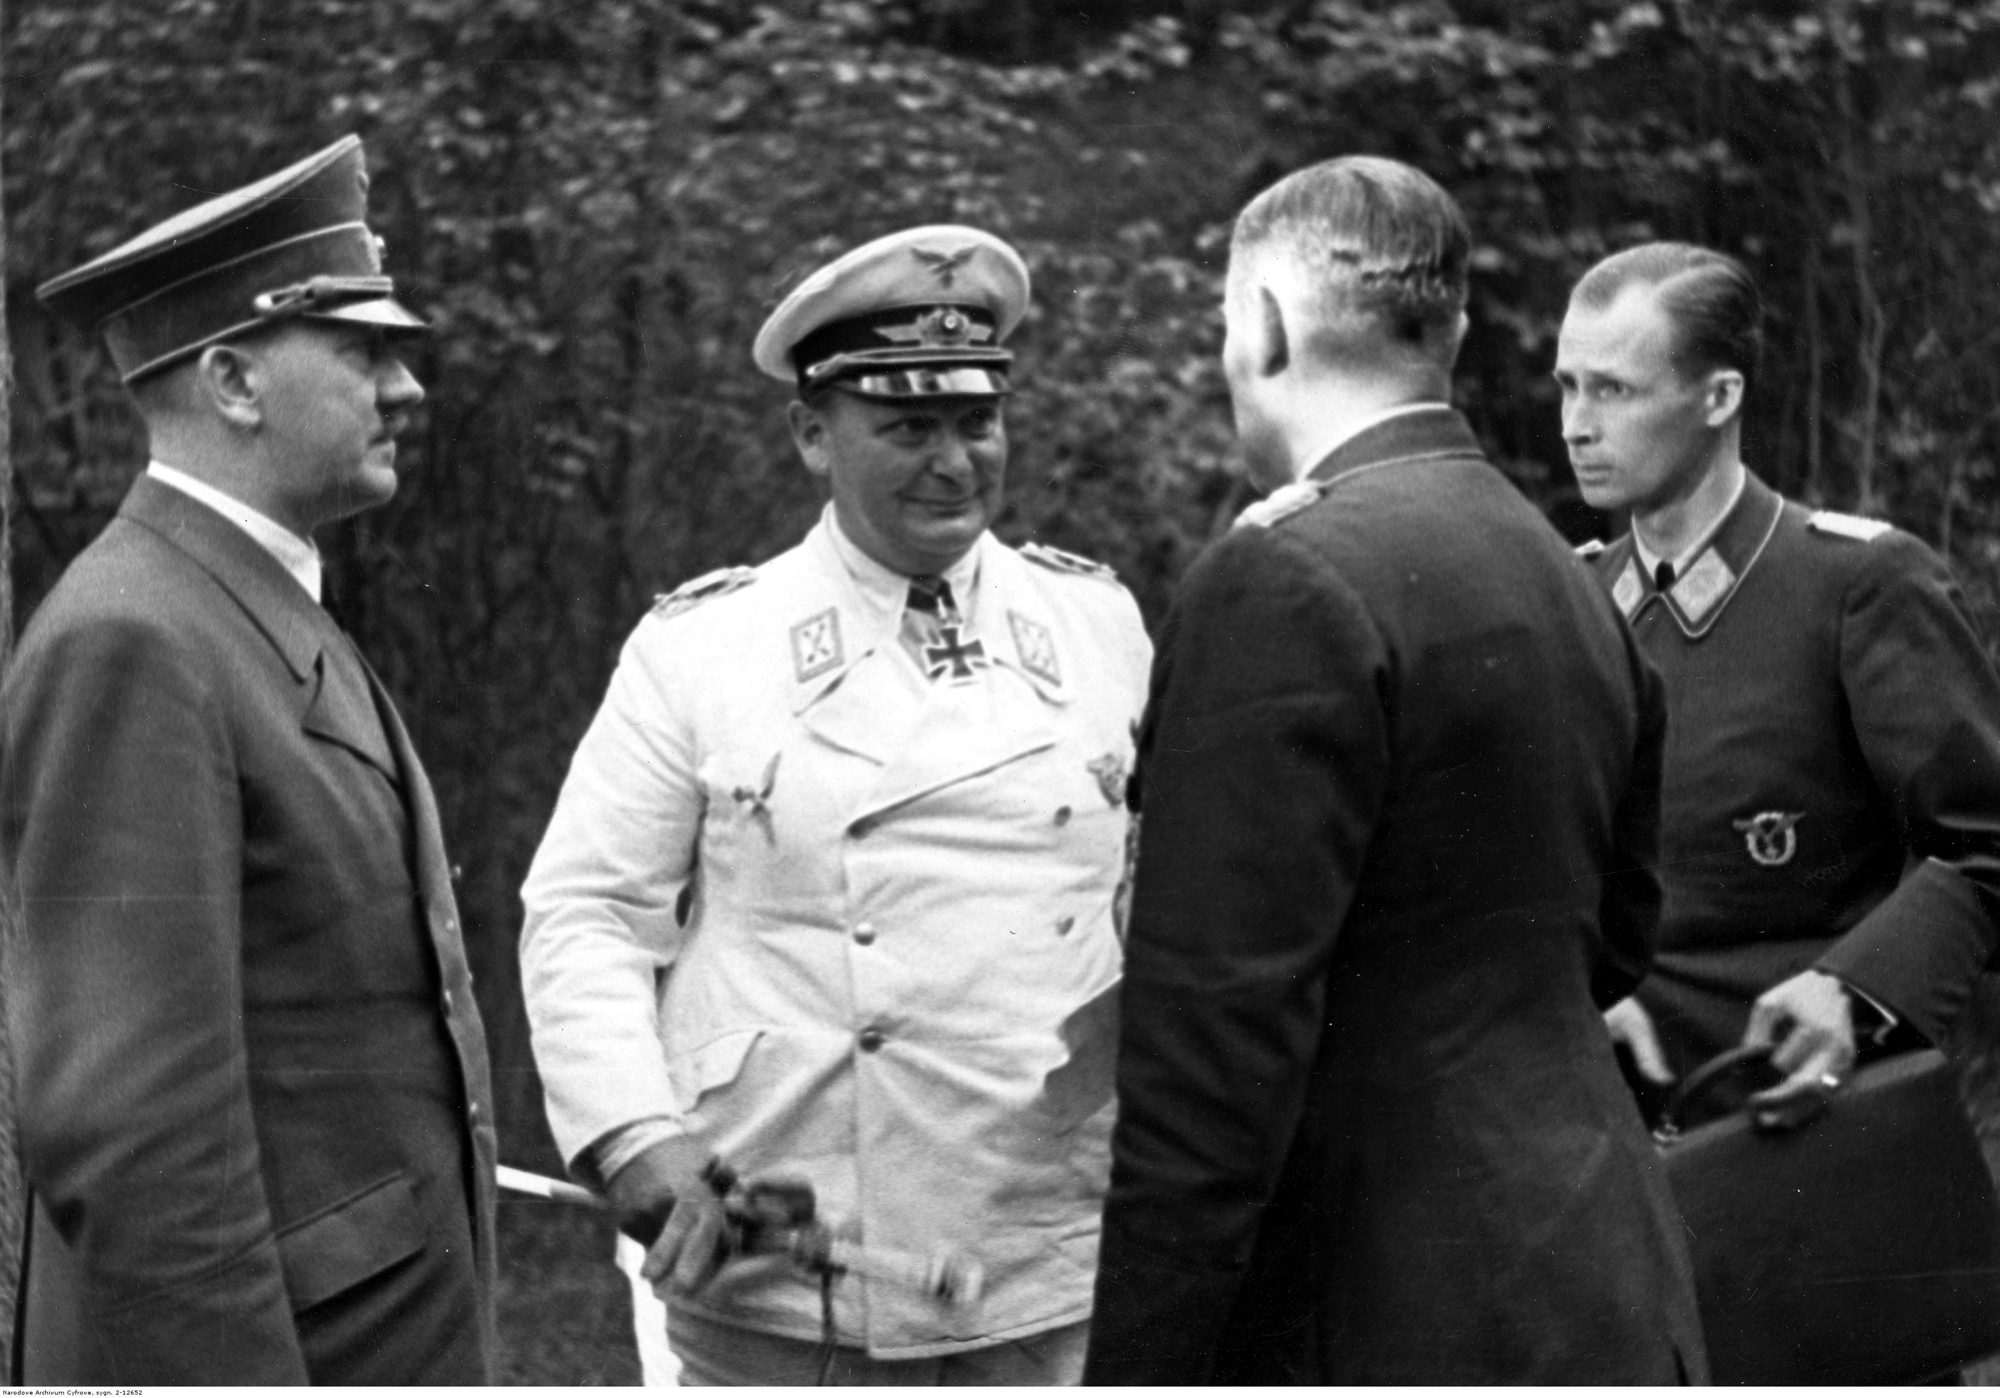 Meeting with Goering and general Karl-Heinrich Bodenschatz, liaison officer between the two leaders of the Party, in the forest of the Wolfschanze